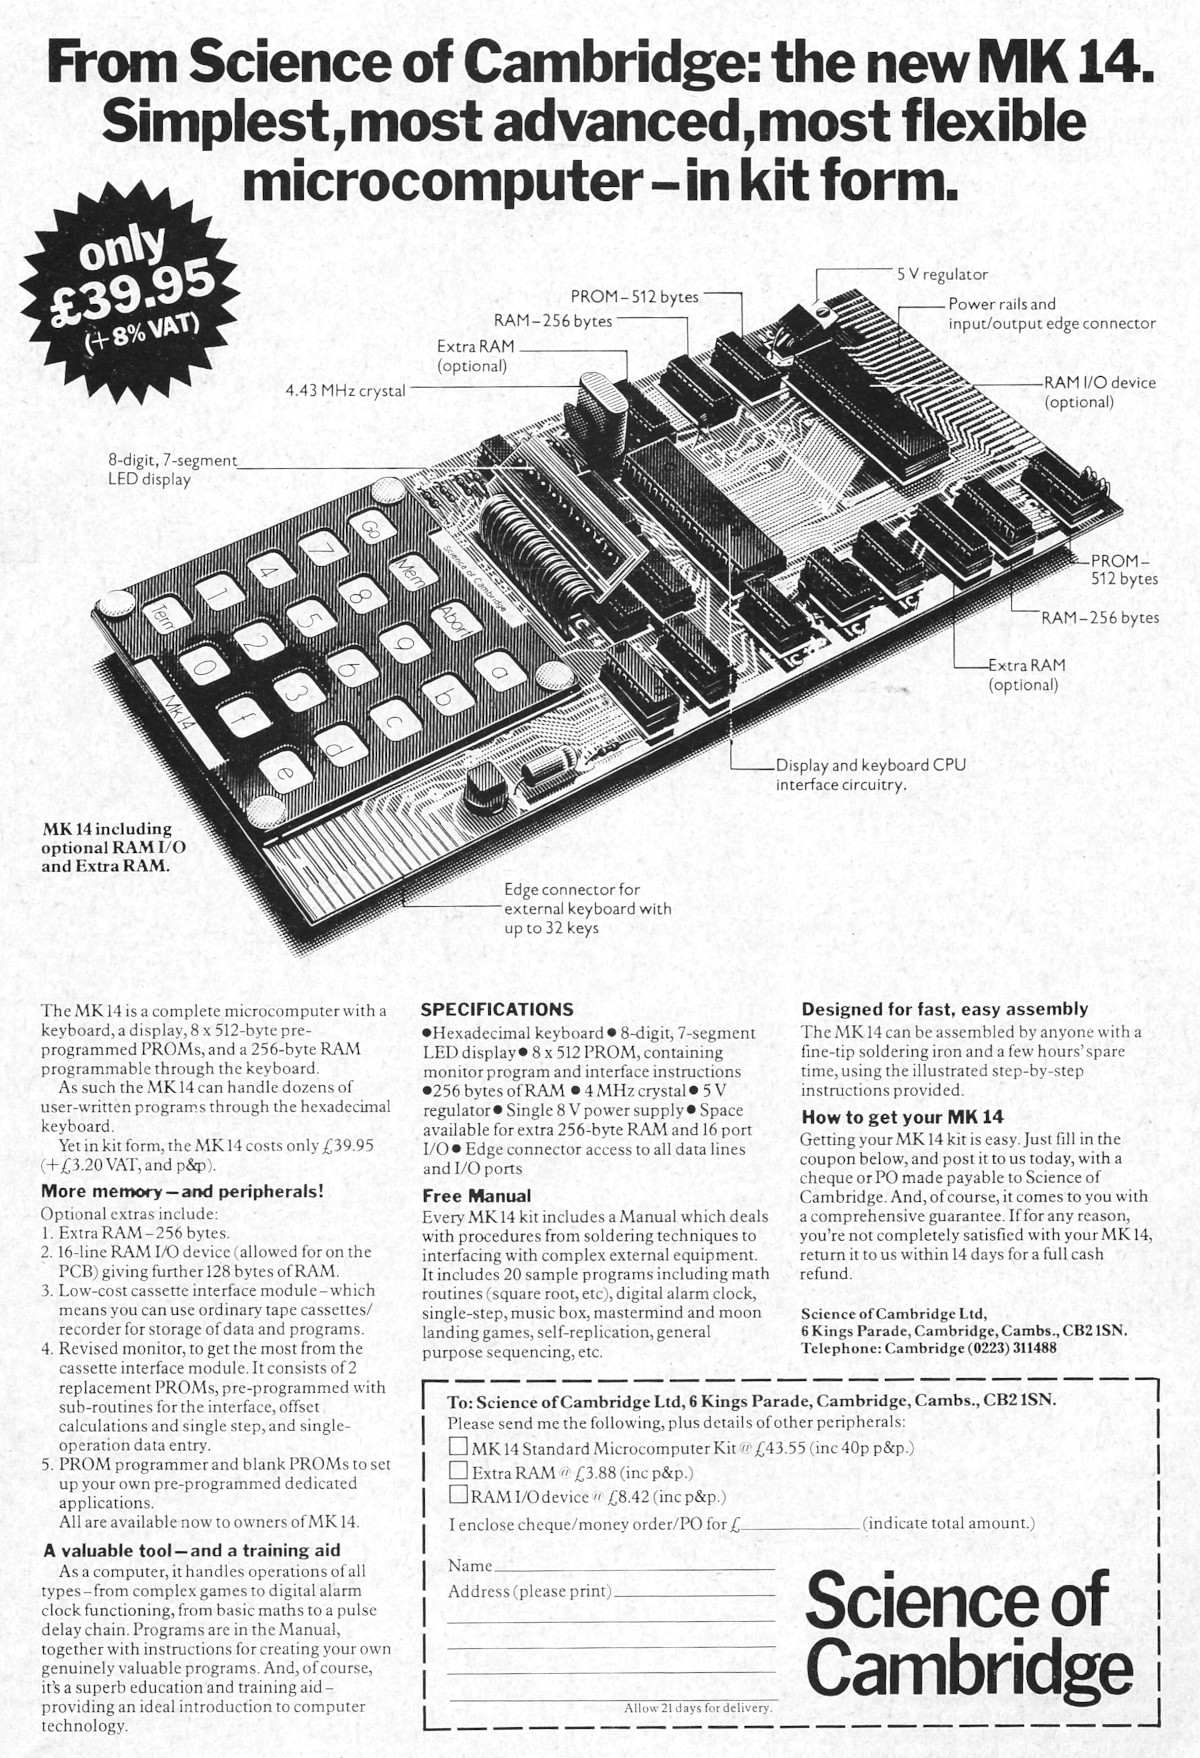 An updated advert from a couple of months later, showing an actual product MK14. From Personal Computer World, December 1978